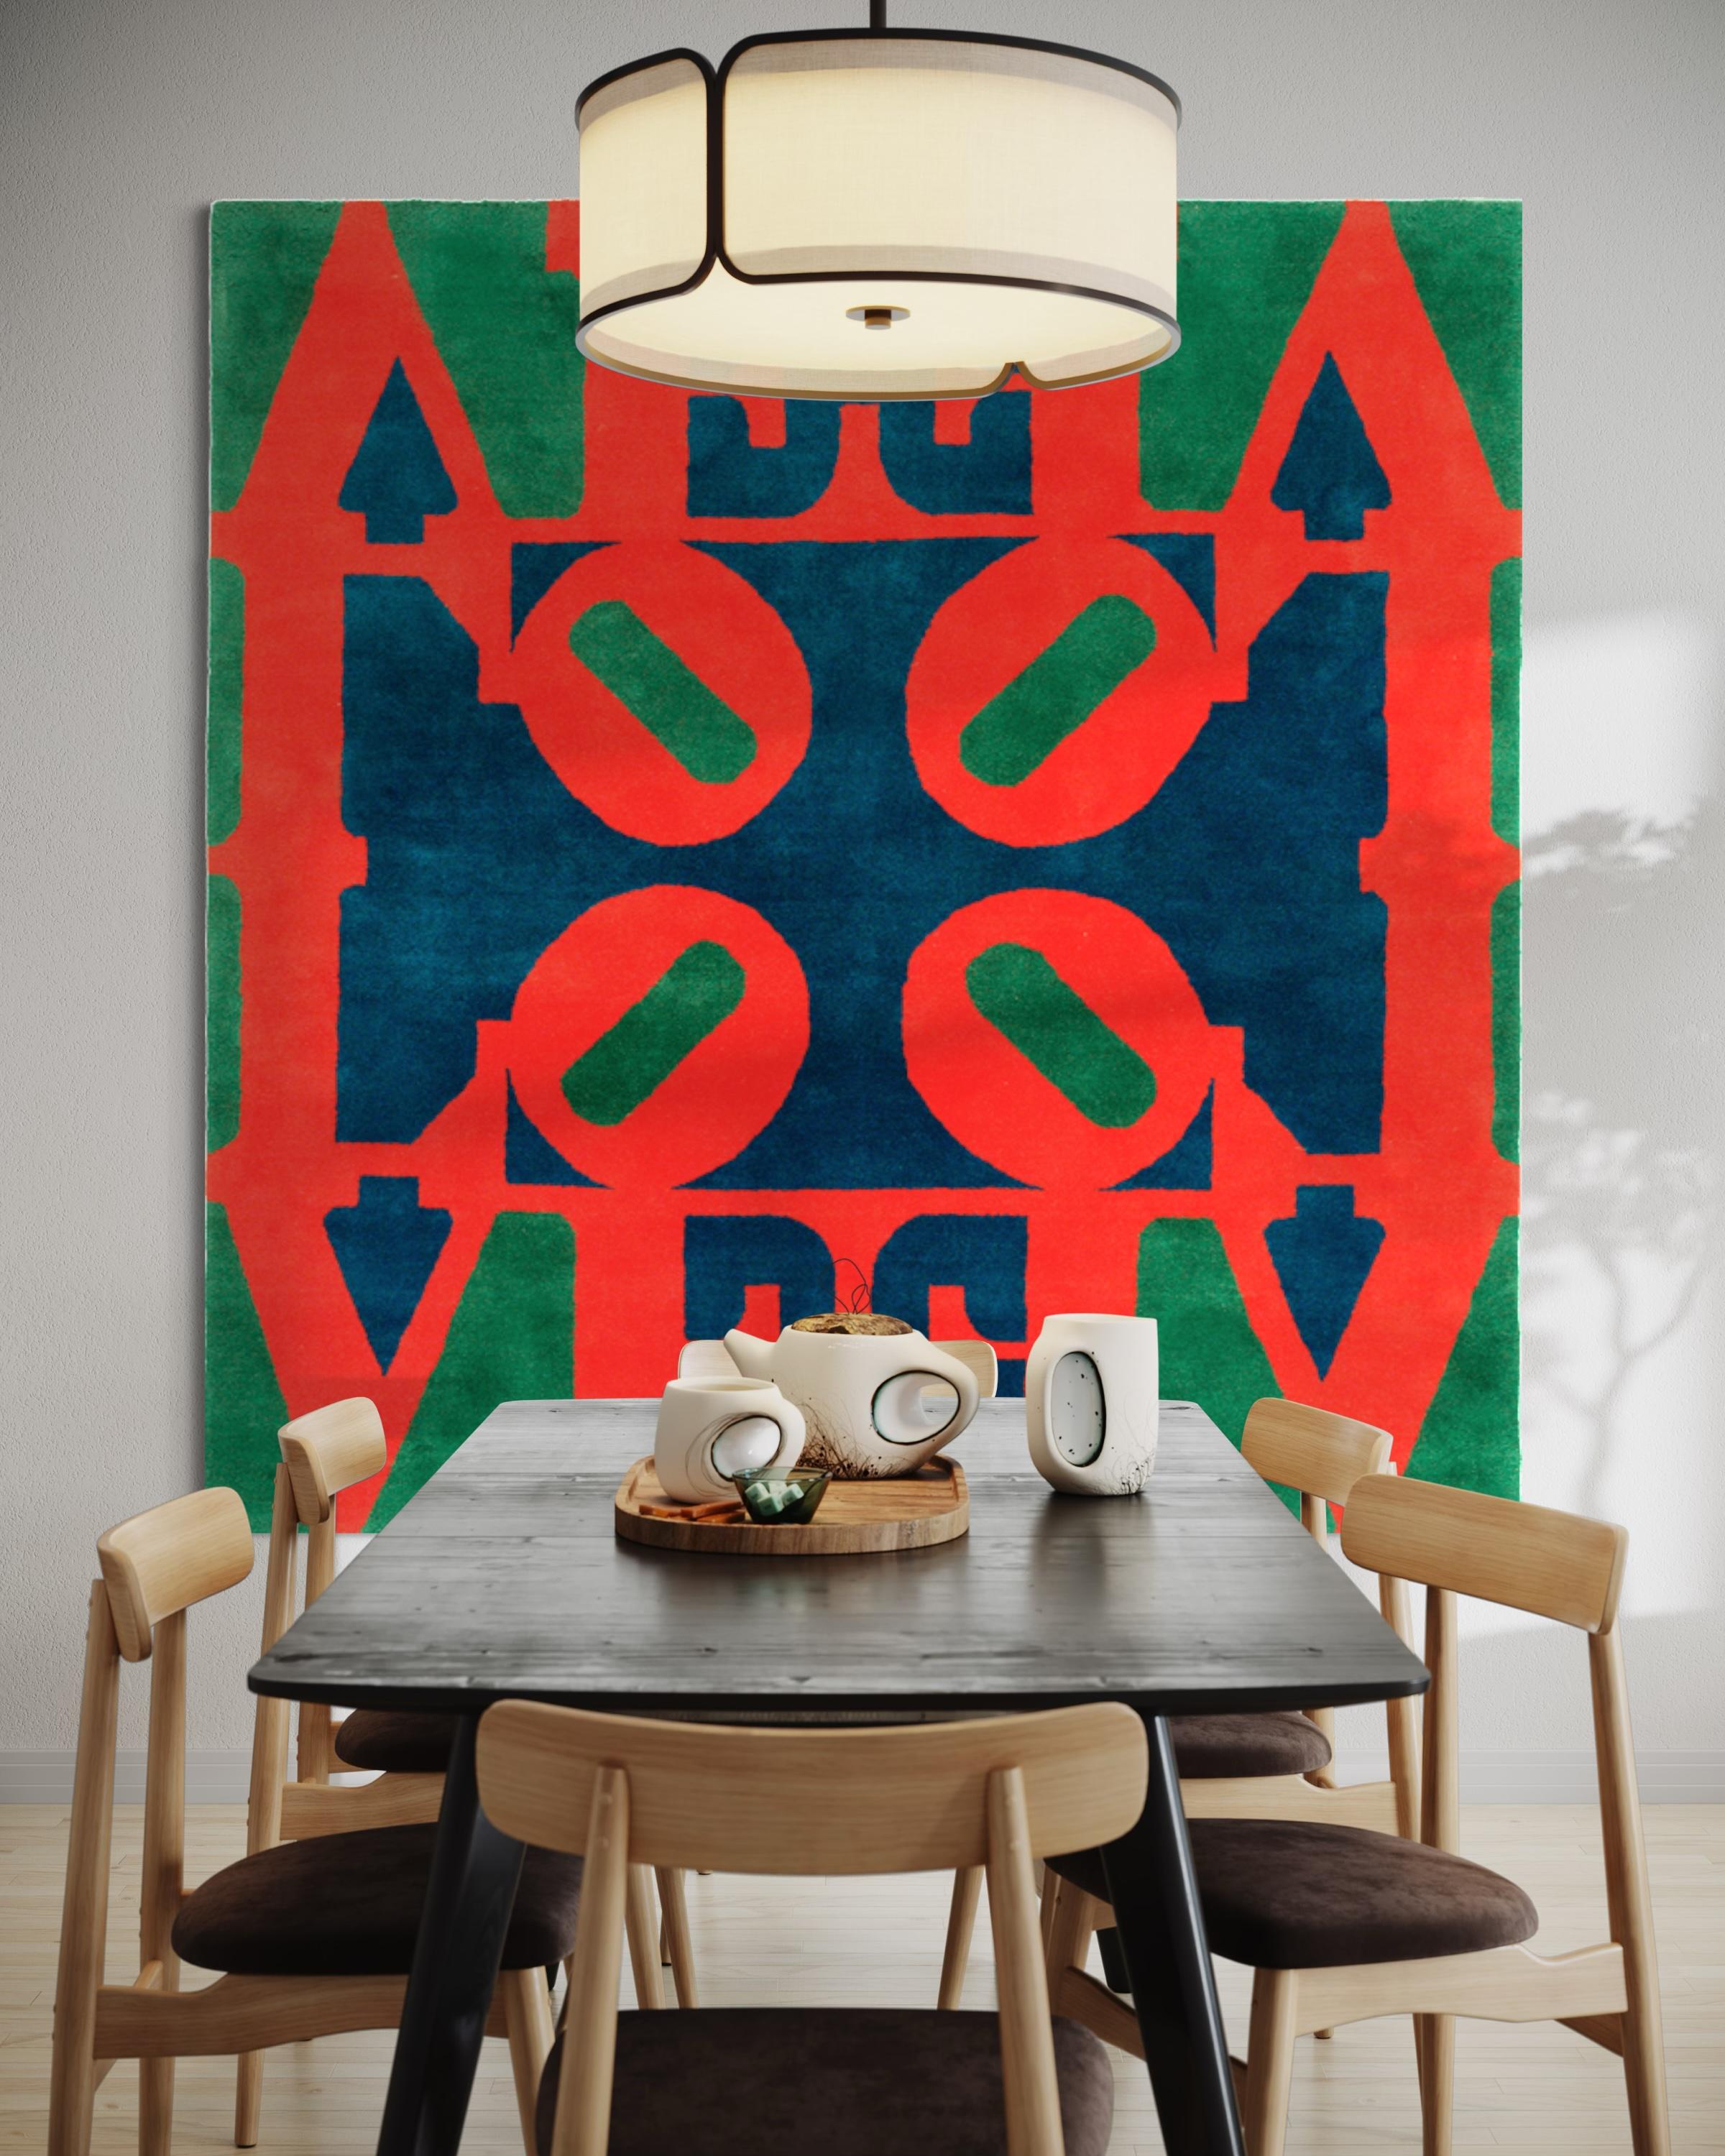 Presenting an exquisite large Love tapestry by the renowned artist Robert Indiana. Crafted in 1968, this exceptional artwork stands as a testament to Indiana's iconic Love motif and artistic prowess. Despite its age, this tapestry remains in superb